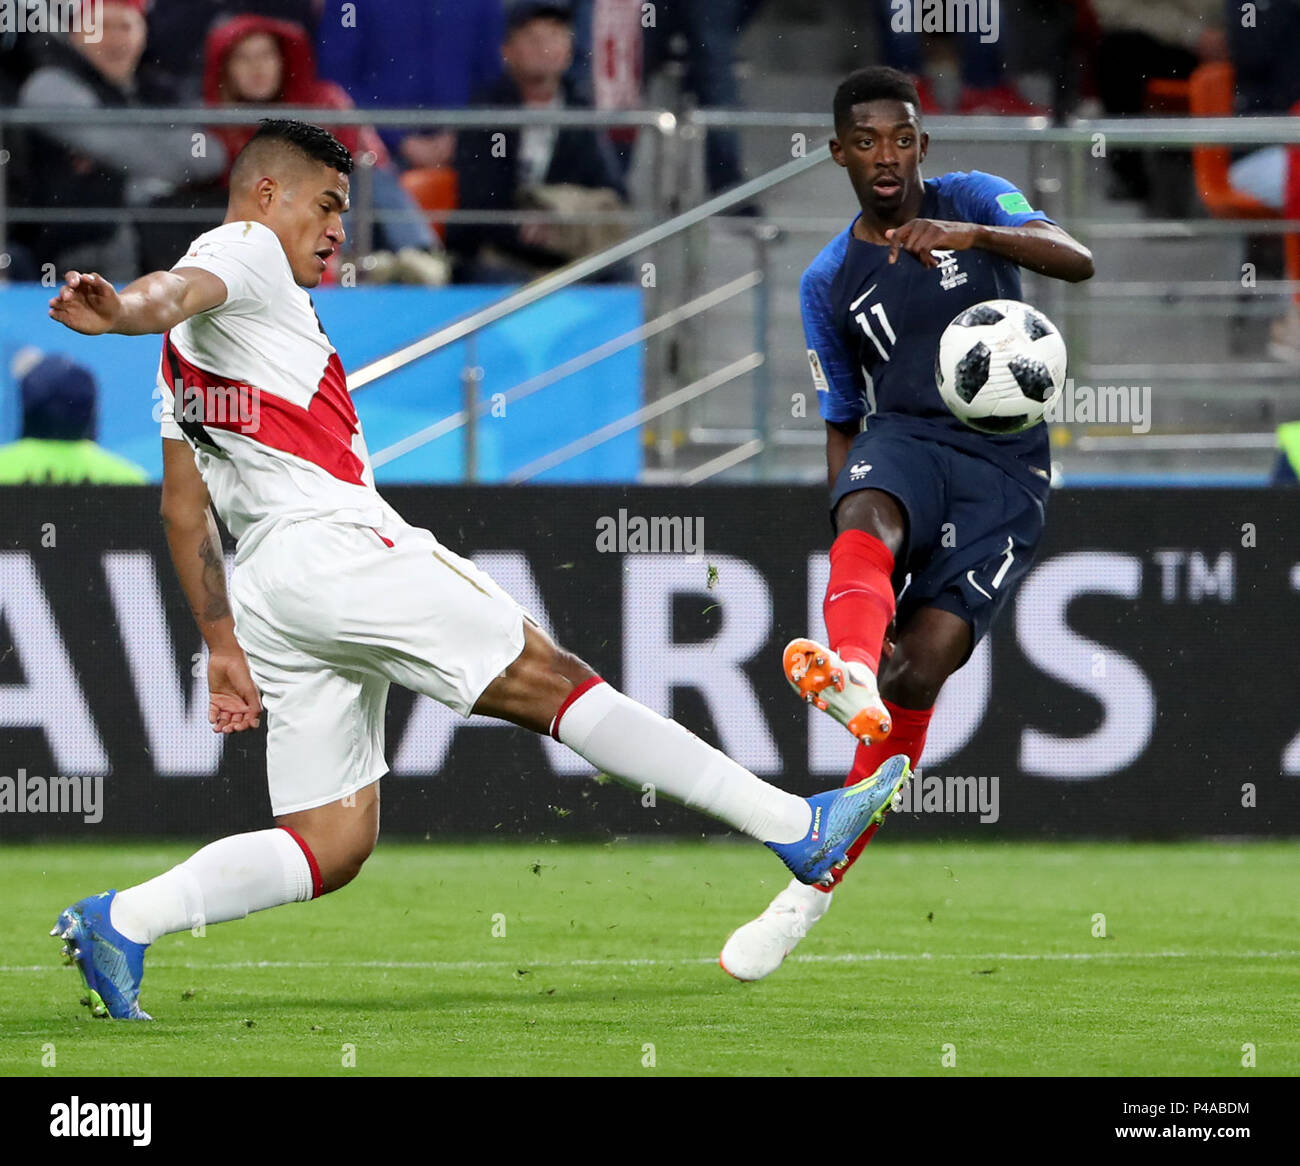 Yekaterinburg, Russia. 21st June, 2018. Anderson Santamaria (L) of Peru vies with Ousmane Dembele of France during the 2018 FIFA World Cup Group C match between France and Peru in Yekaterinburg, Russia, June 21, 2018. France won 1-0. Credit: Bai Xueqi/Xinhua/Alamy Live News Stock Photo